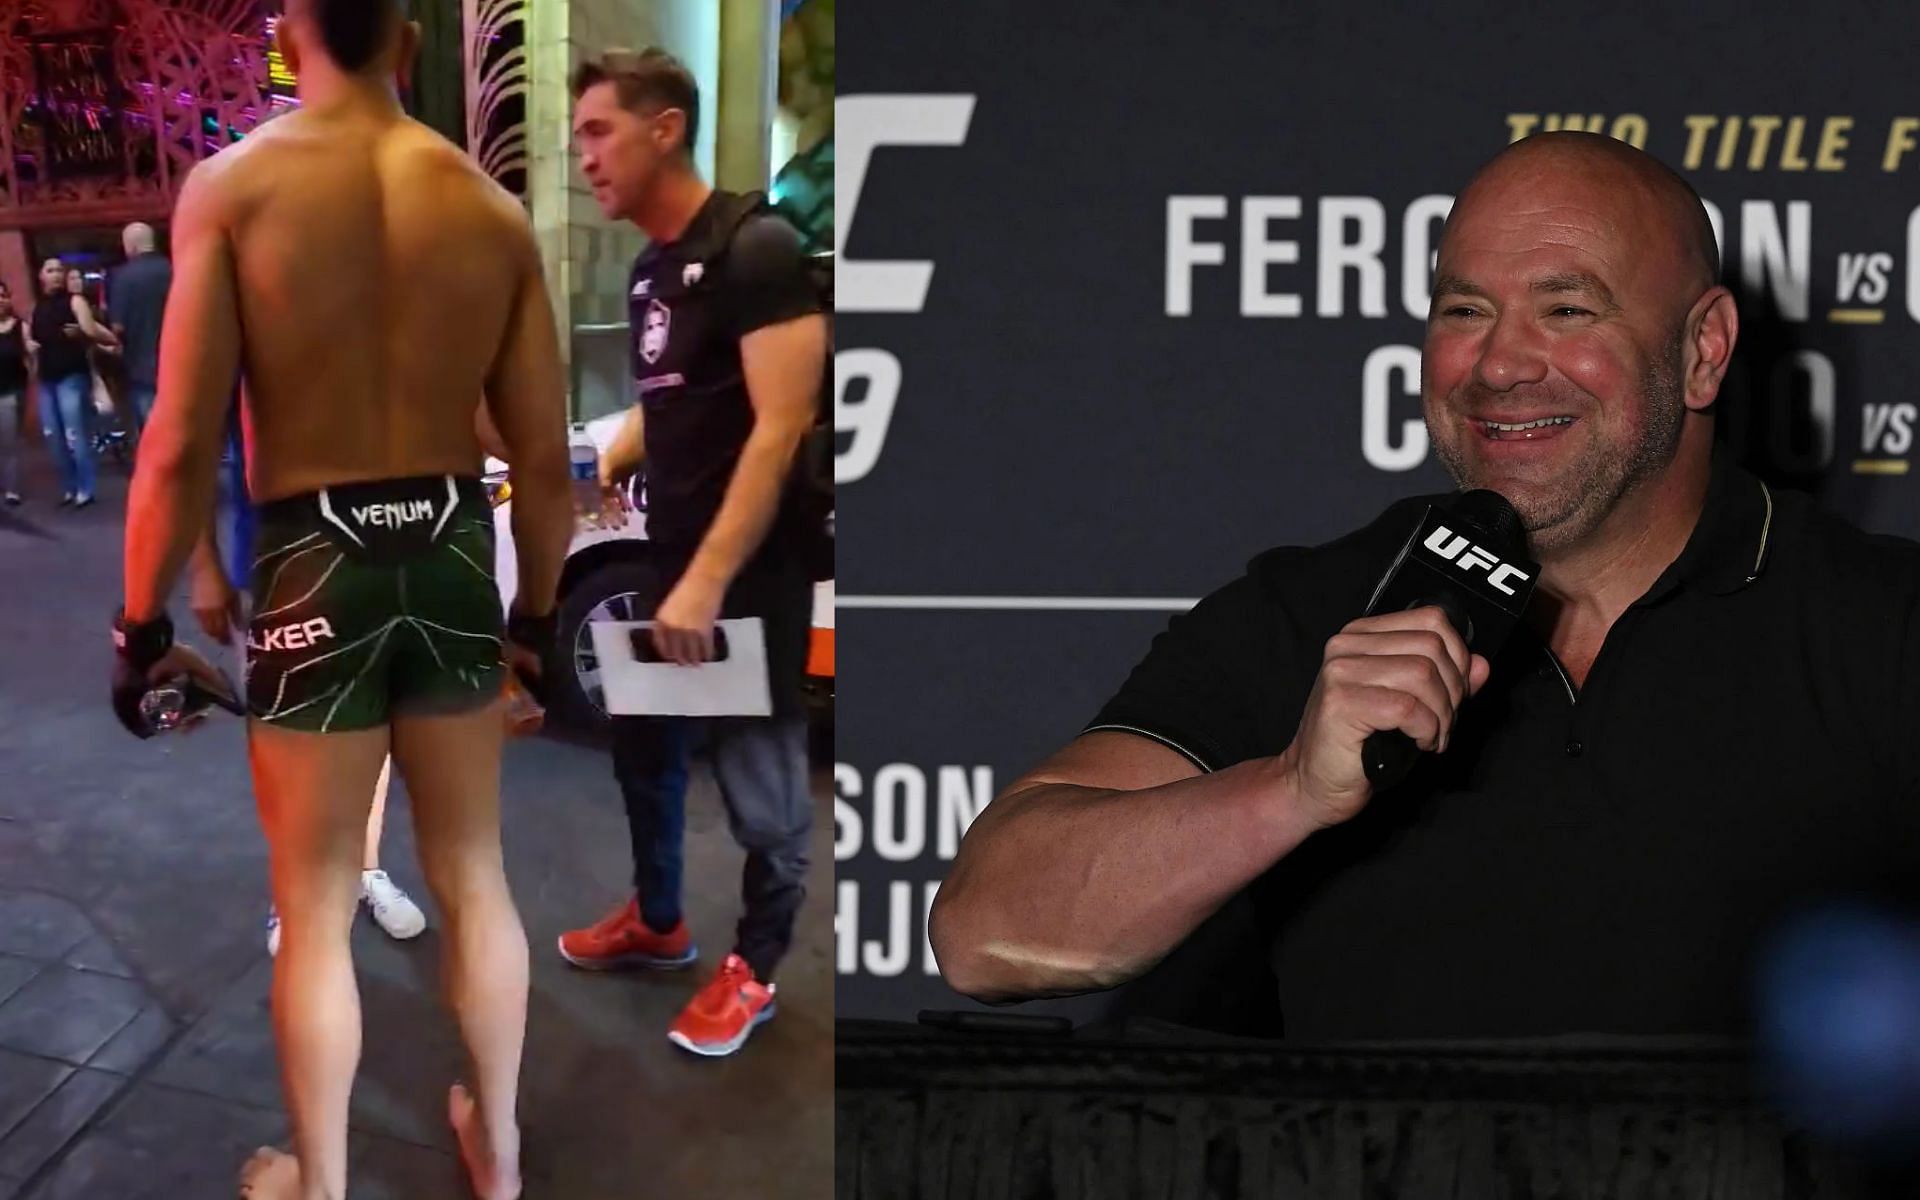 Johnny Walker after leaving UFC event (left) [Image courtesy: @John_Kavanagh on Twitter] and Dana White (right)